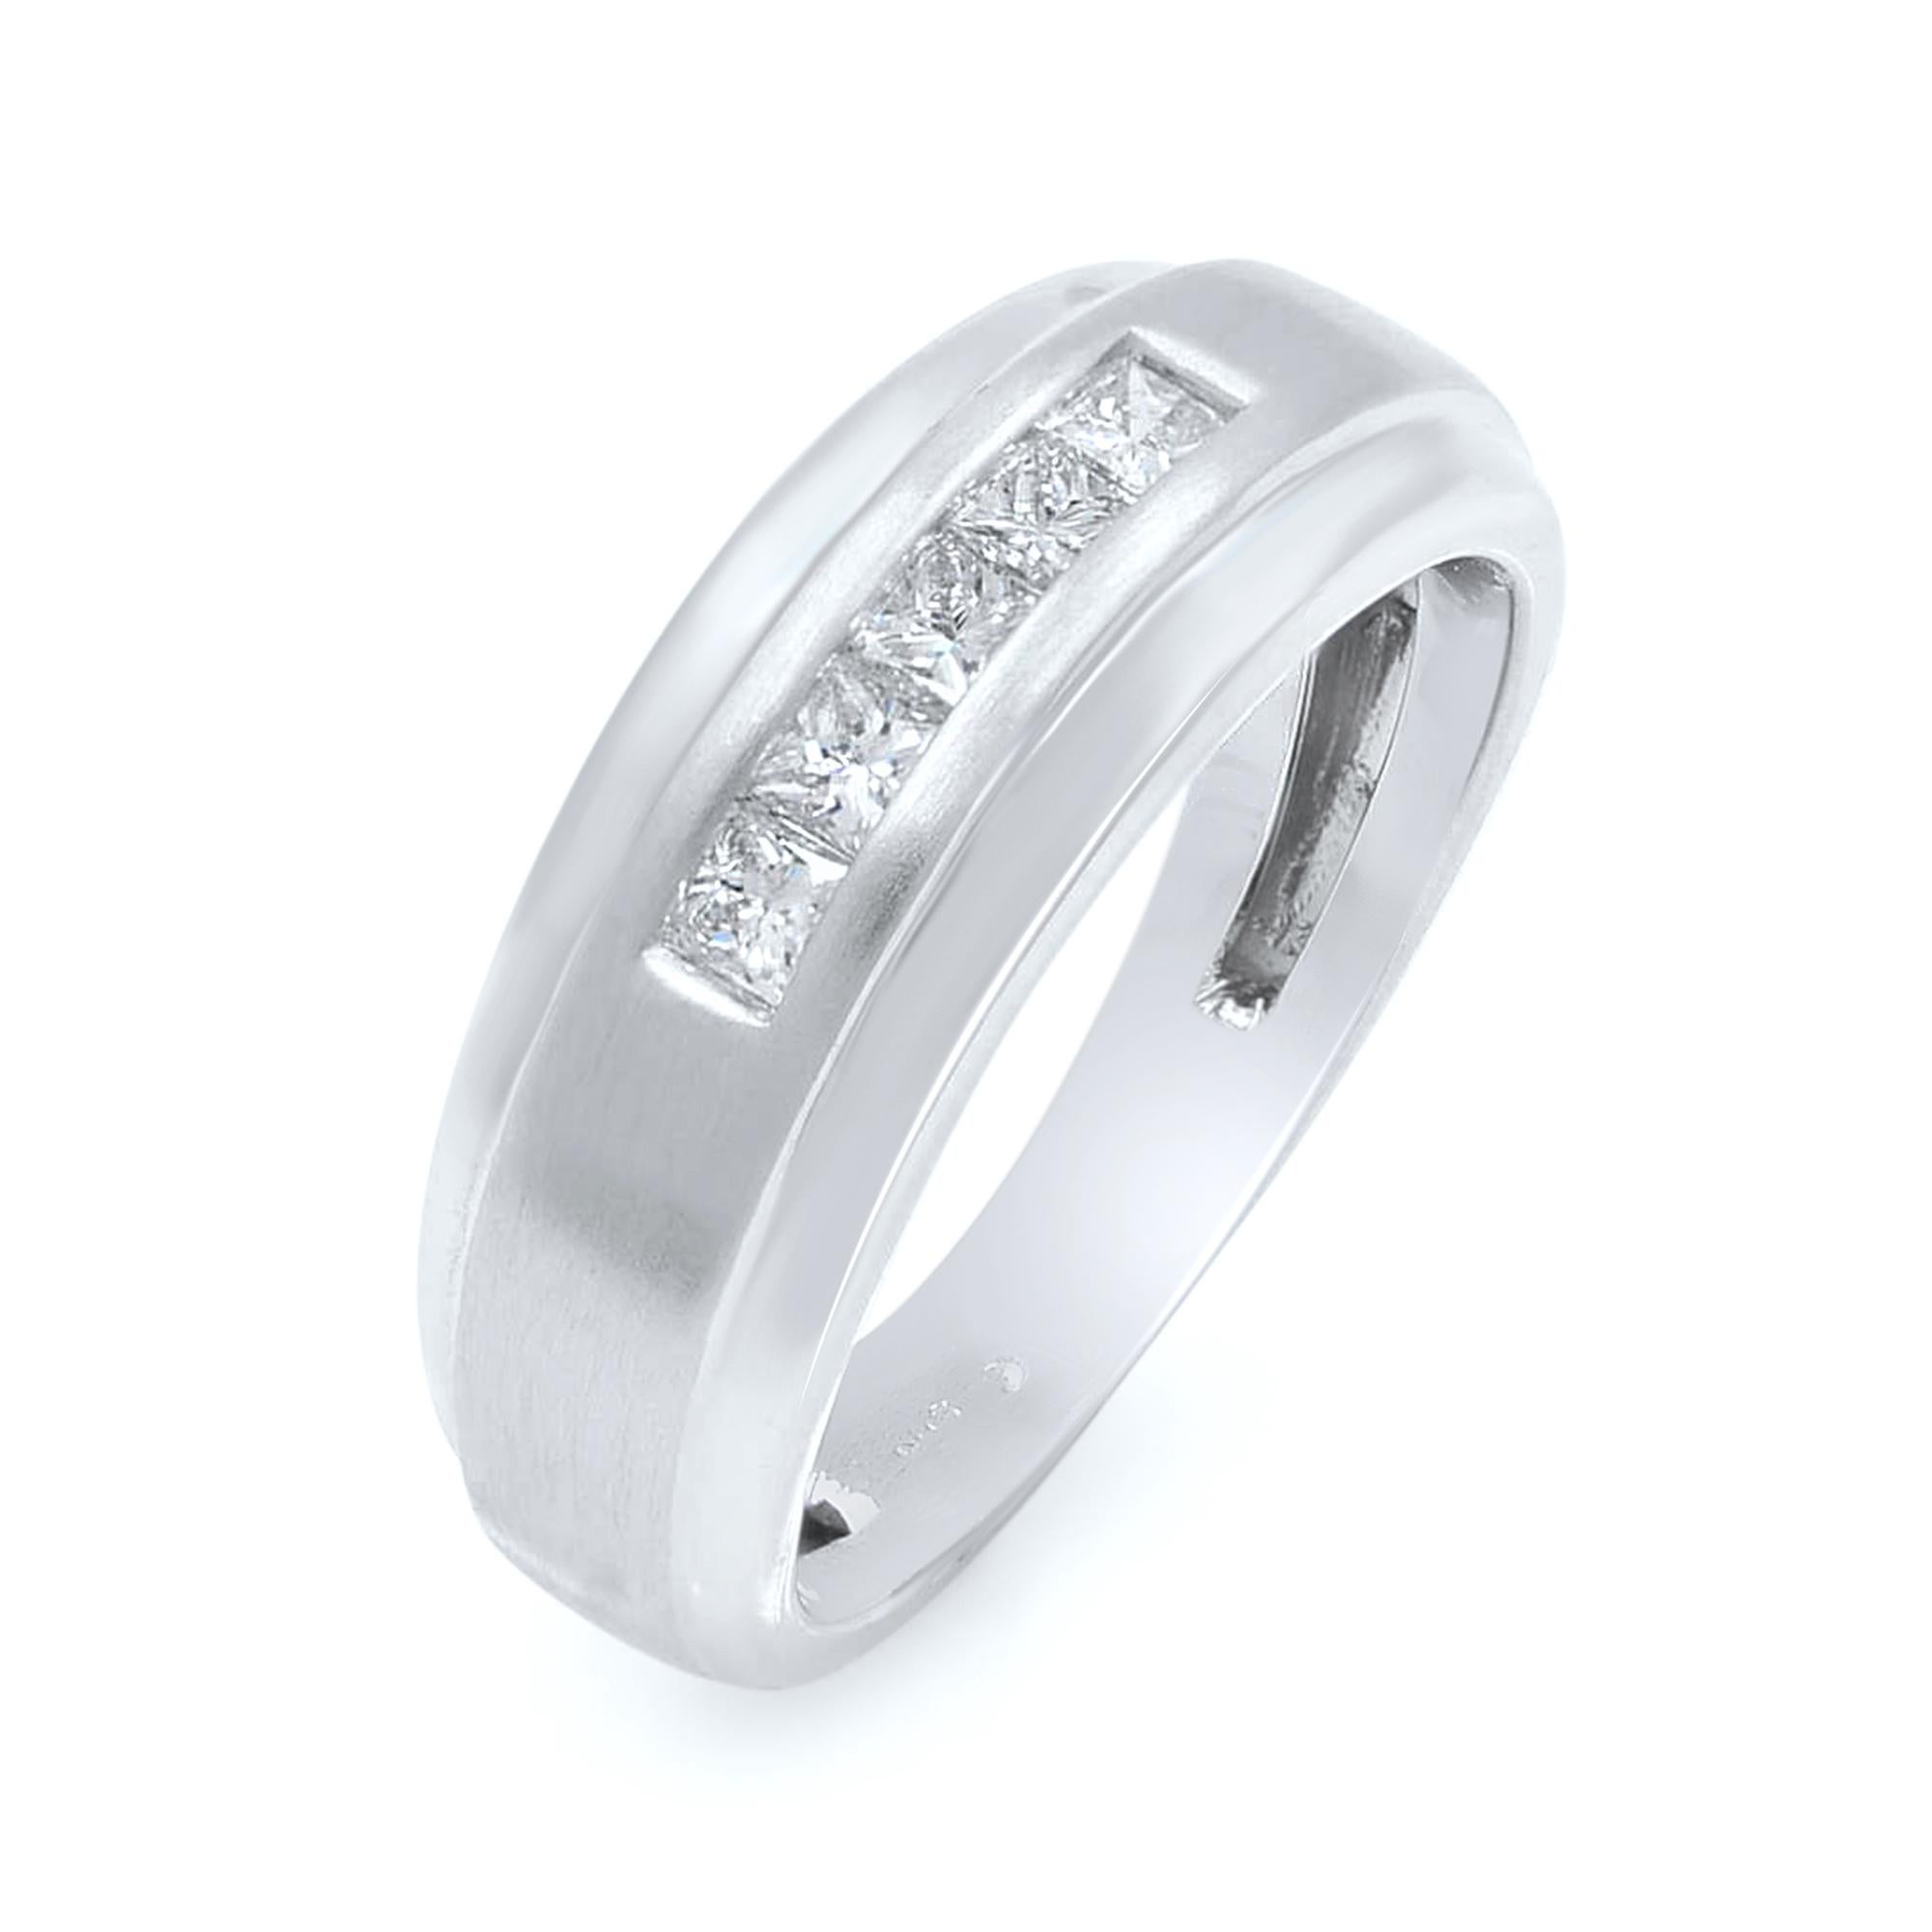 Men's diamond wedding band ring crafted in 10k white gold. The total carat weight of the ring is 0.40. The diamonds are channel set and are of H-I color and VS-SI clarity. Ring size is 10 (Can be resized). Top of the ring width: 8mm. Bottom shank